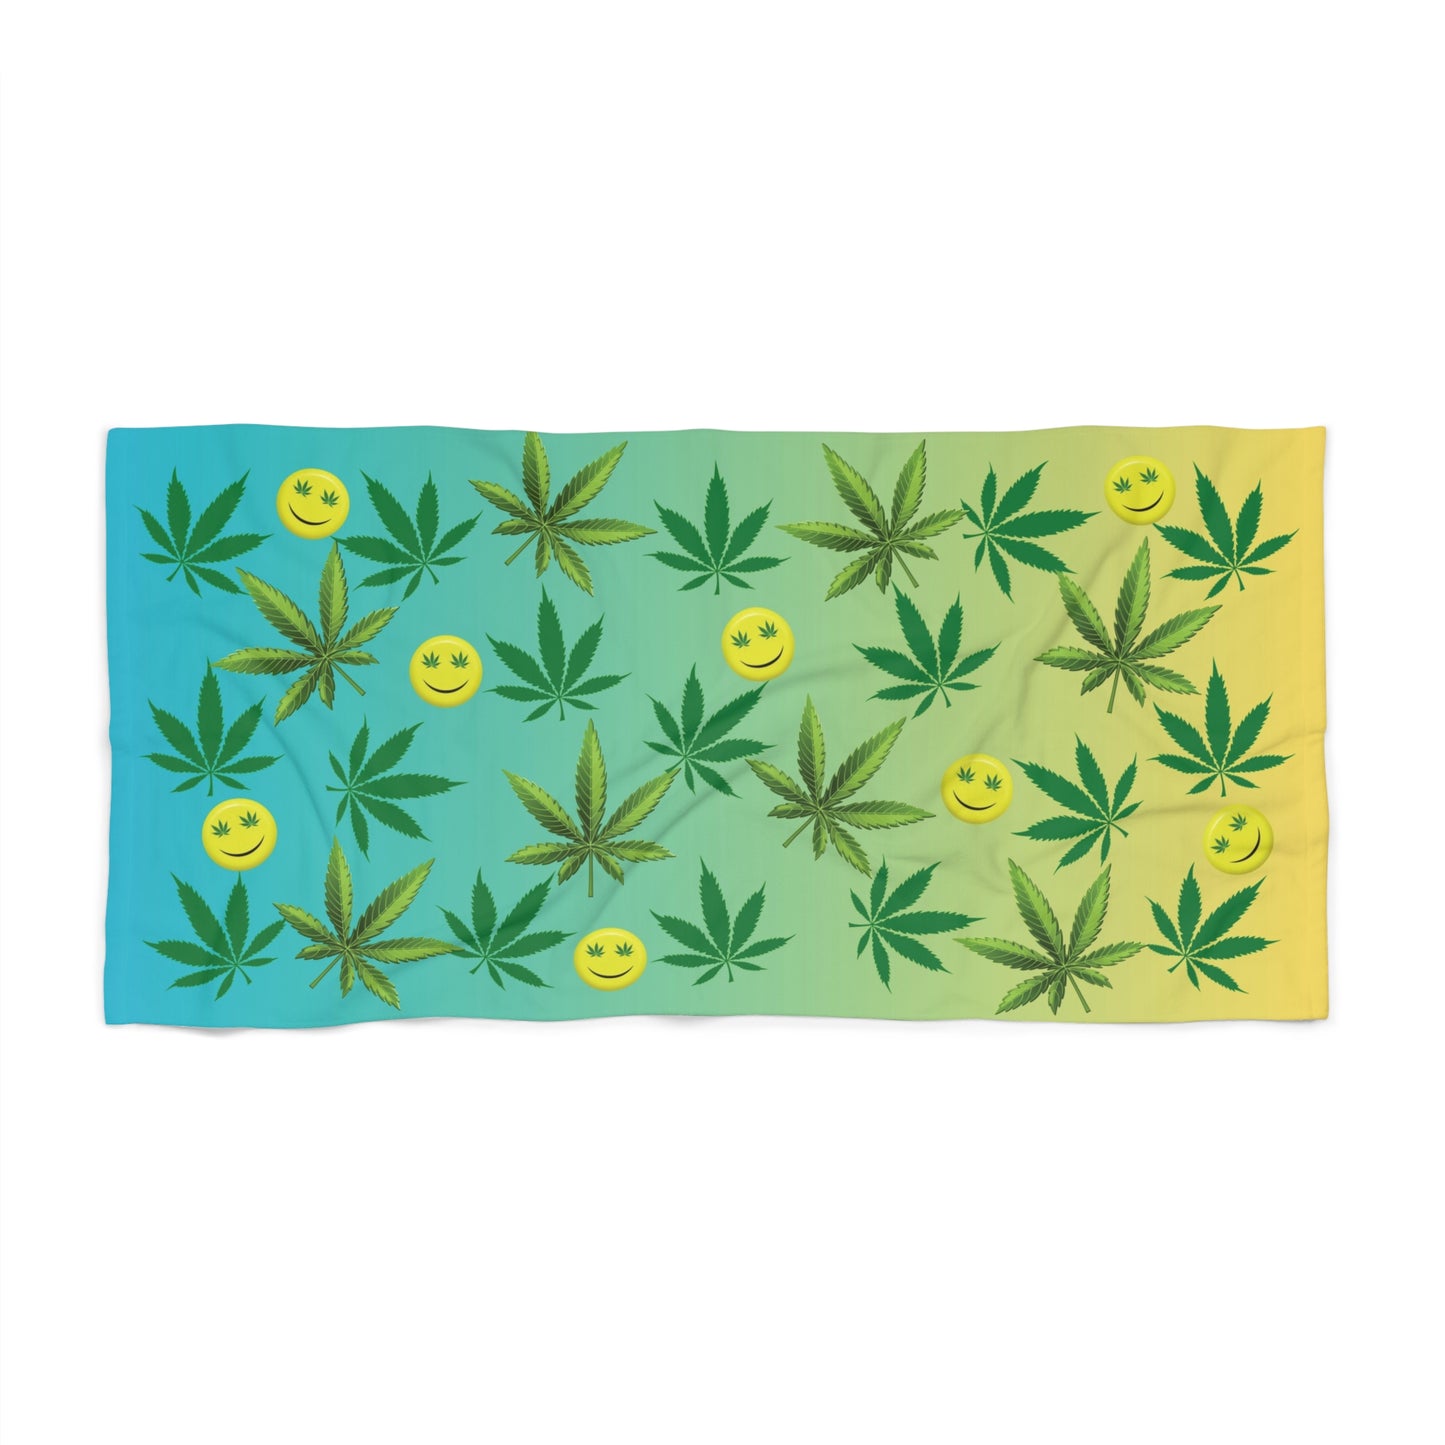 We Smile Together Cannabis Beach Towel